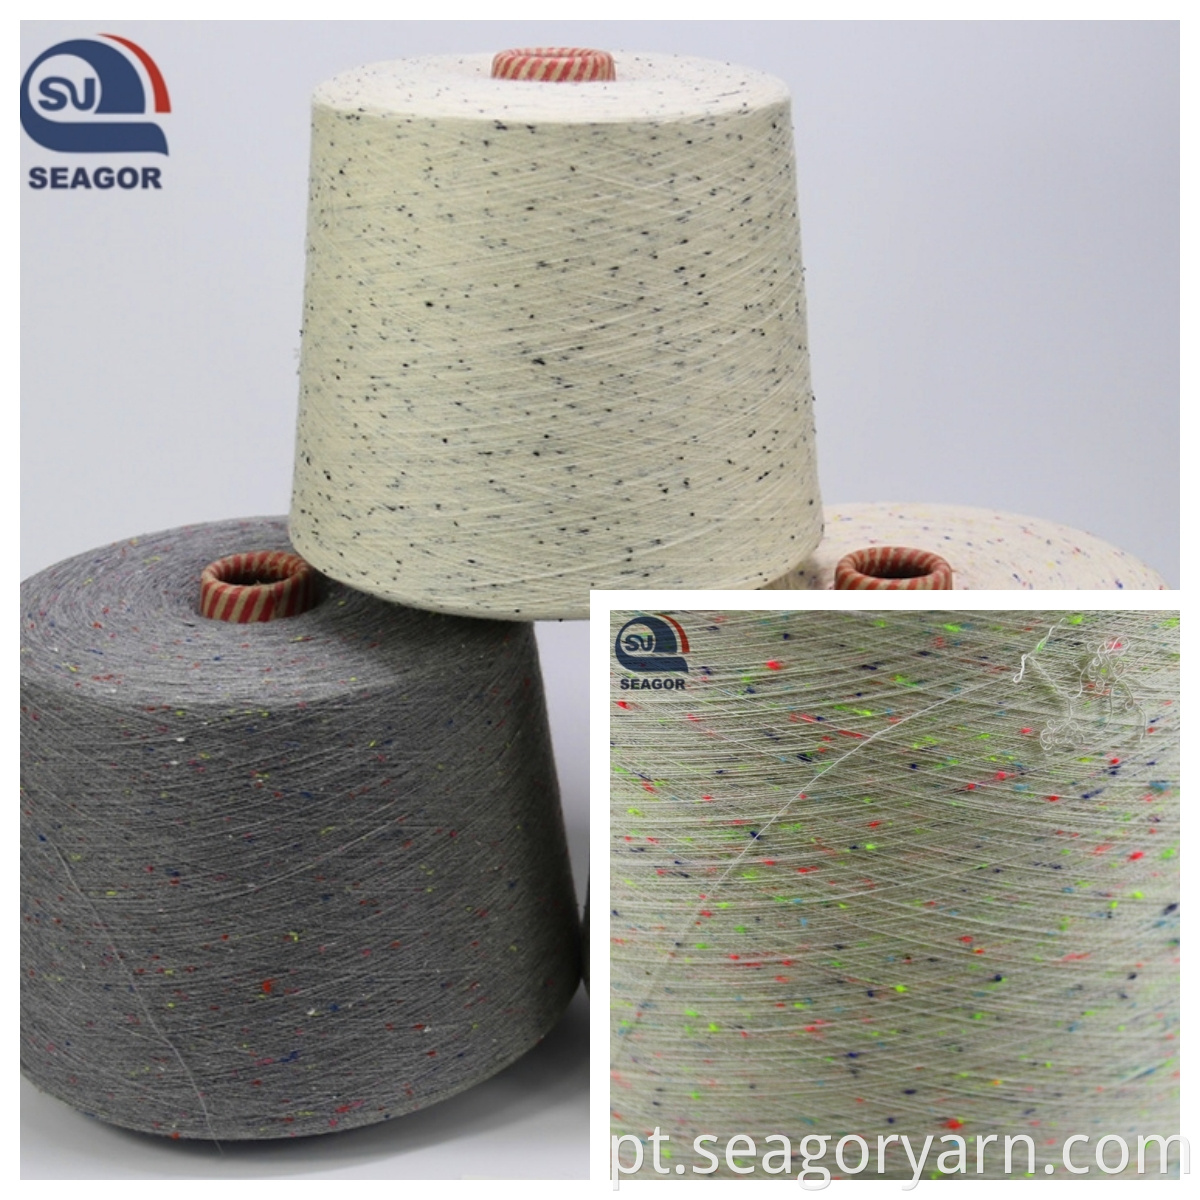 yarn provides softness and breathability